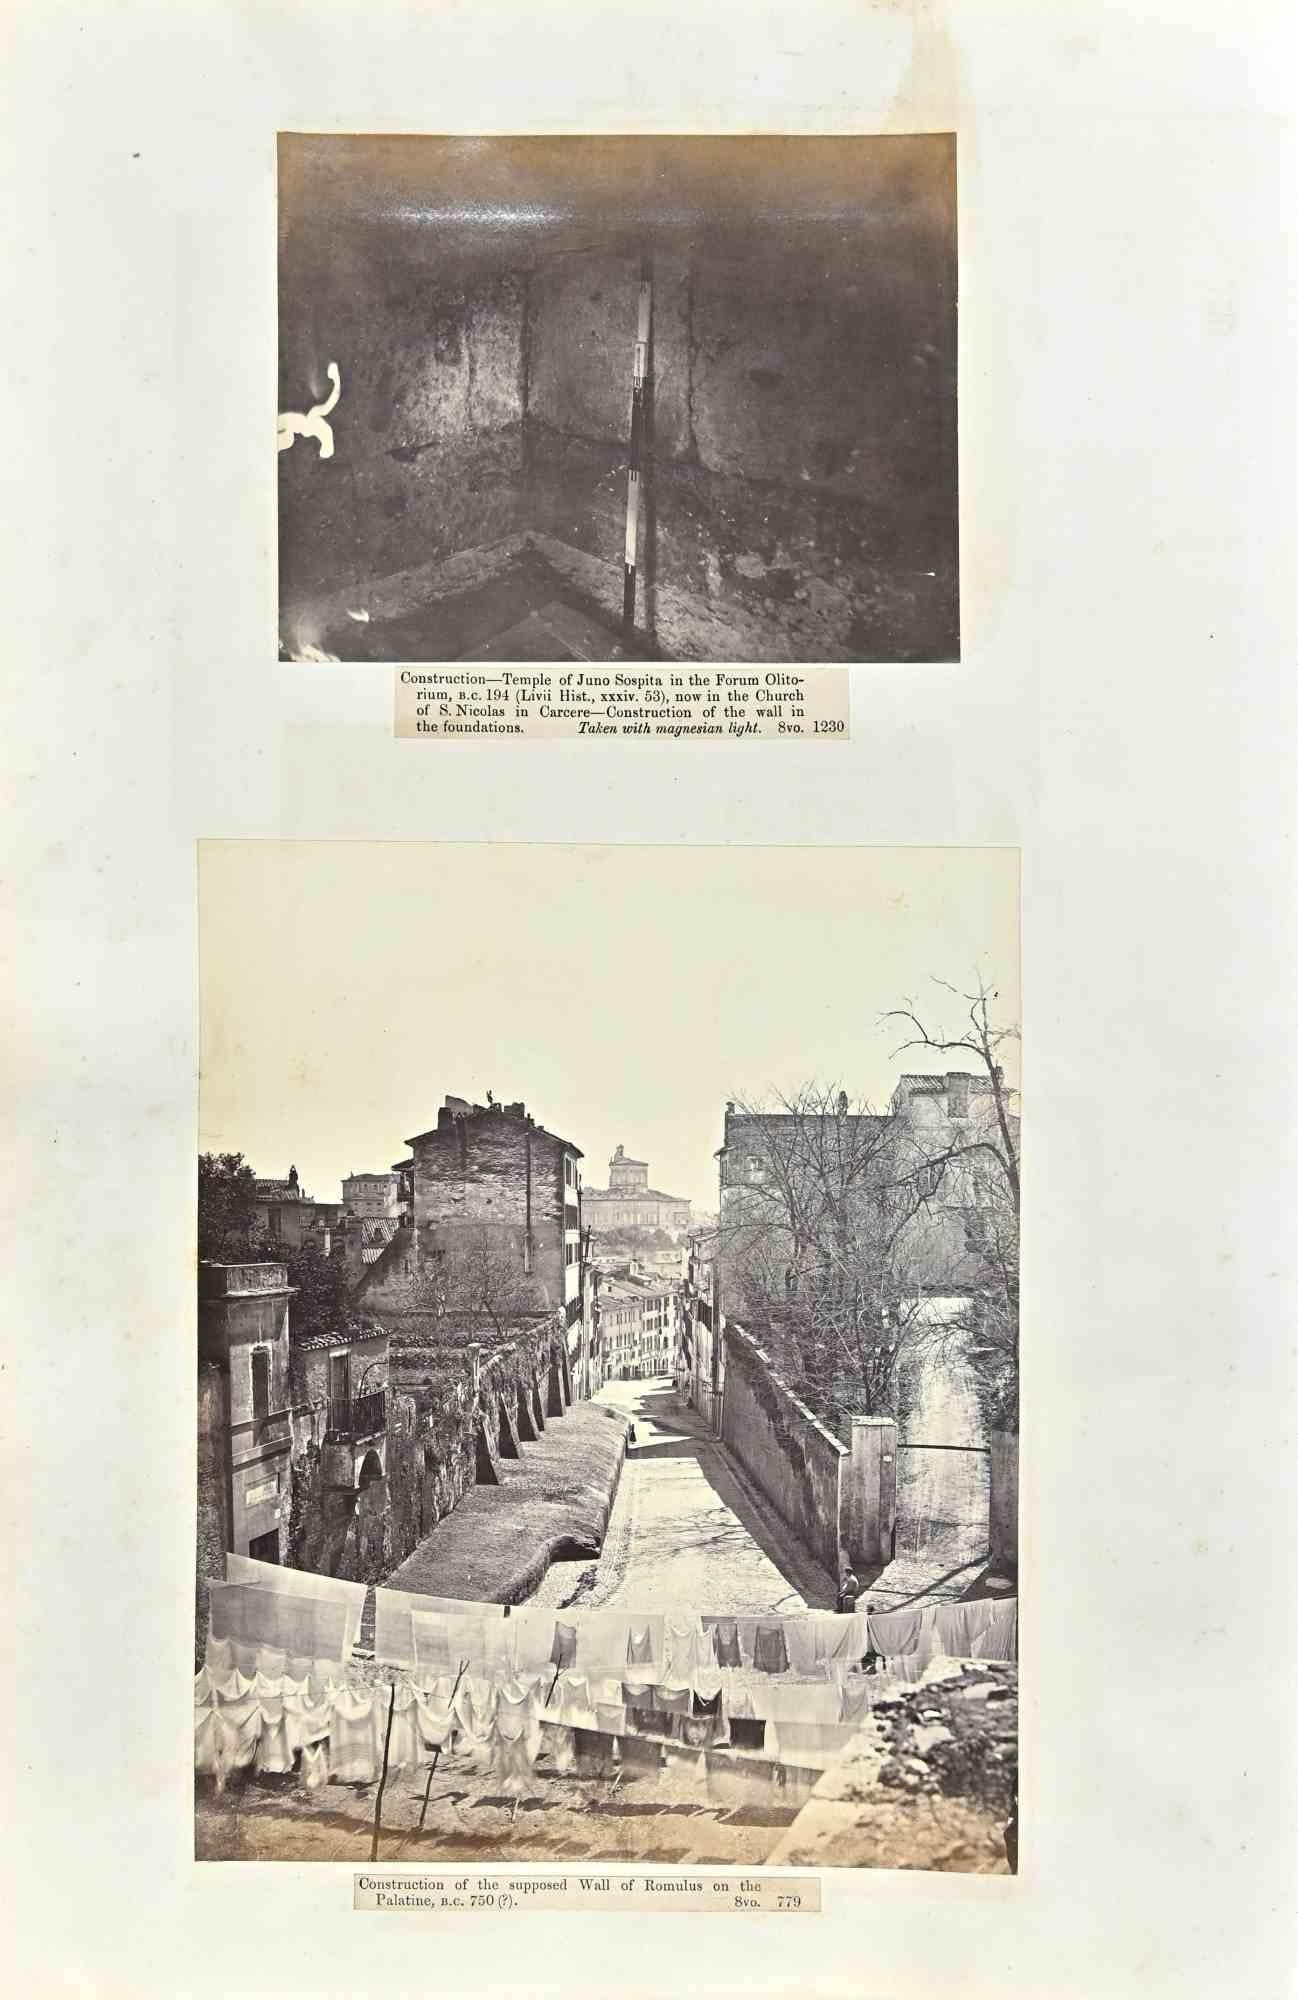 View Of Rome - Vintage Photograph is a Vintage Photograph in the early 20th Century.

Four photographs, two on the front and two on the rear: Temple of Juno, Wall of Romulus, and Walls of Rome.

Good condition and aged margins.

The artwork belongs